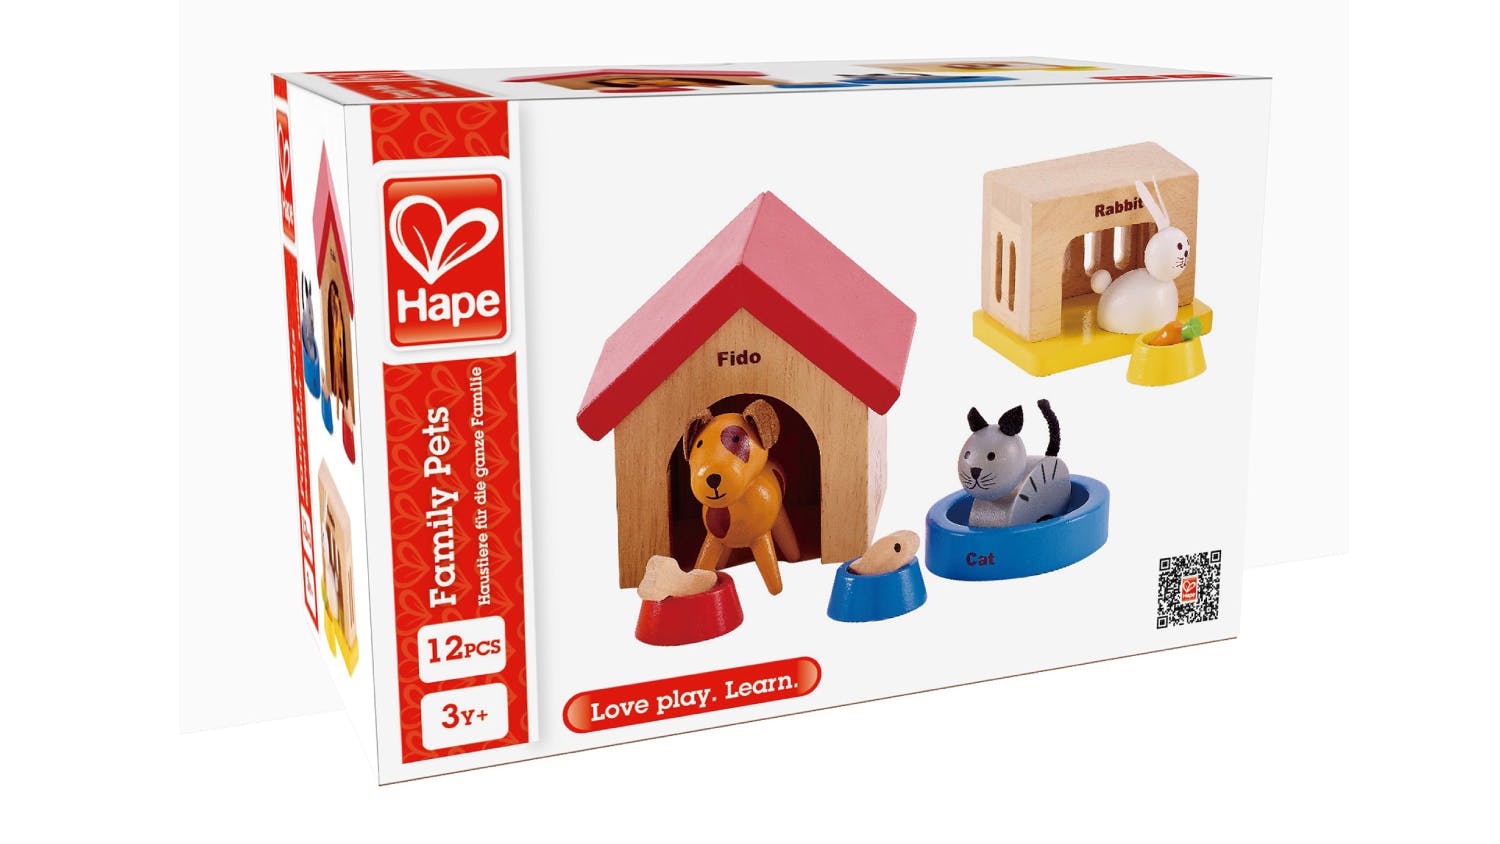 Hape "Happy Family" Wooden Doll Family Furniture Set - Pet Accessories